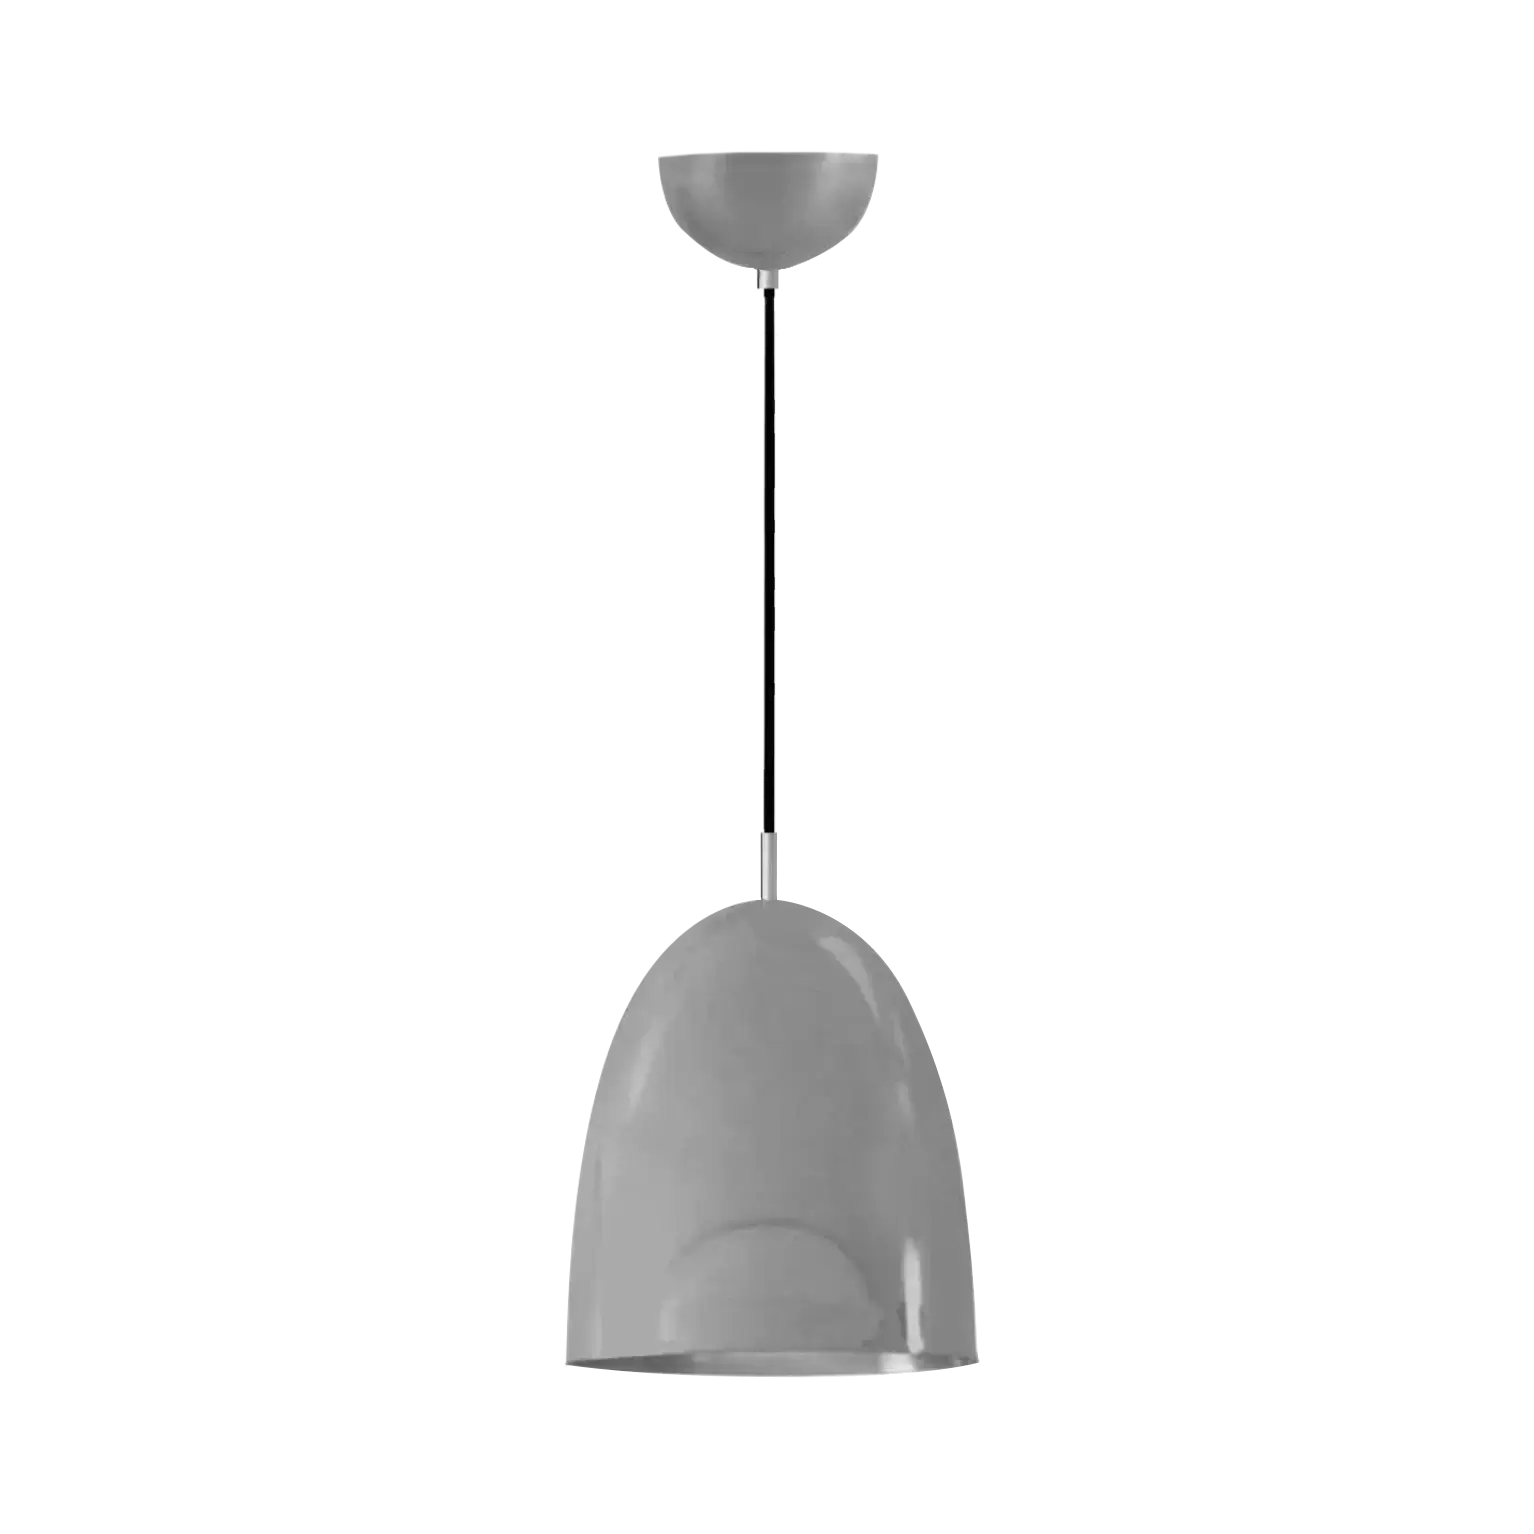 Dounia home Pendant light in nickel silver   made of Metal, Model: Roya  dome